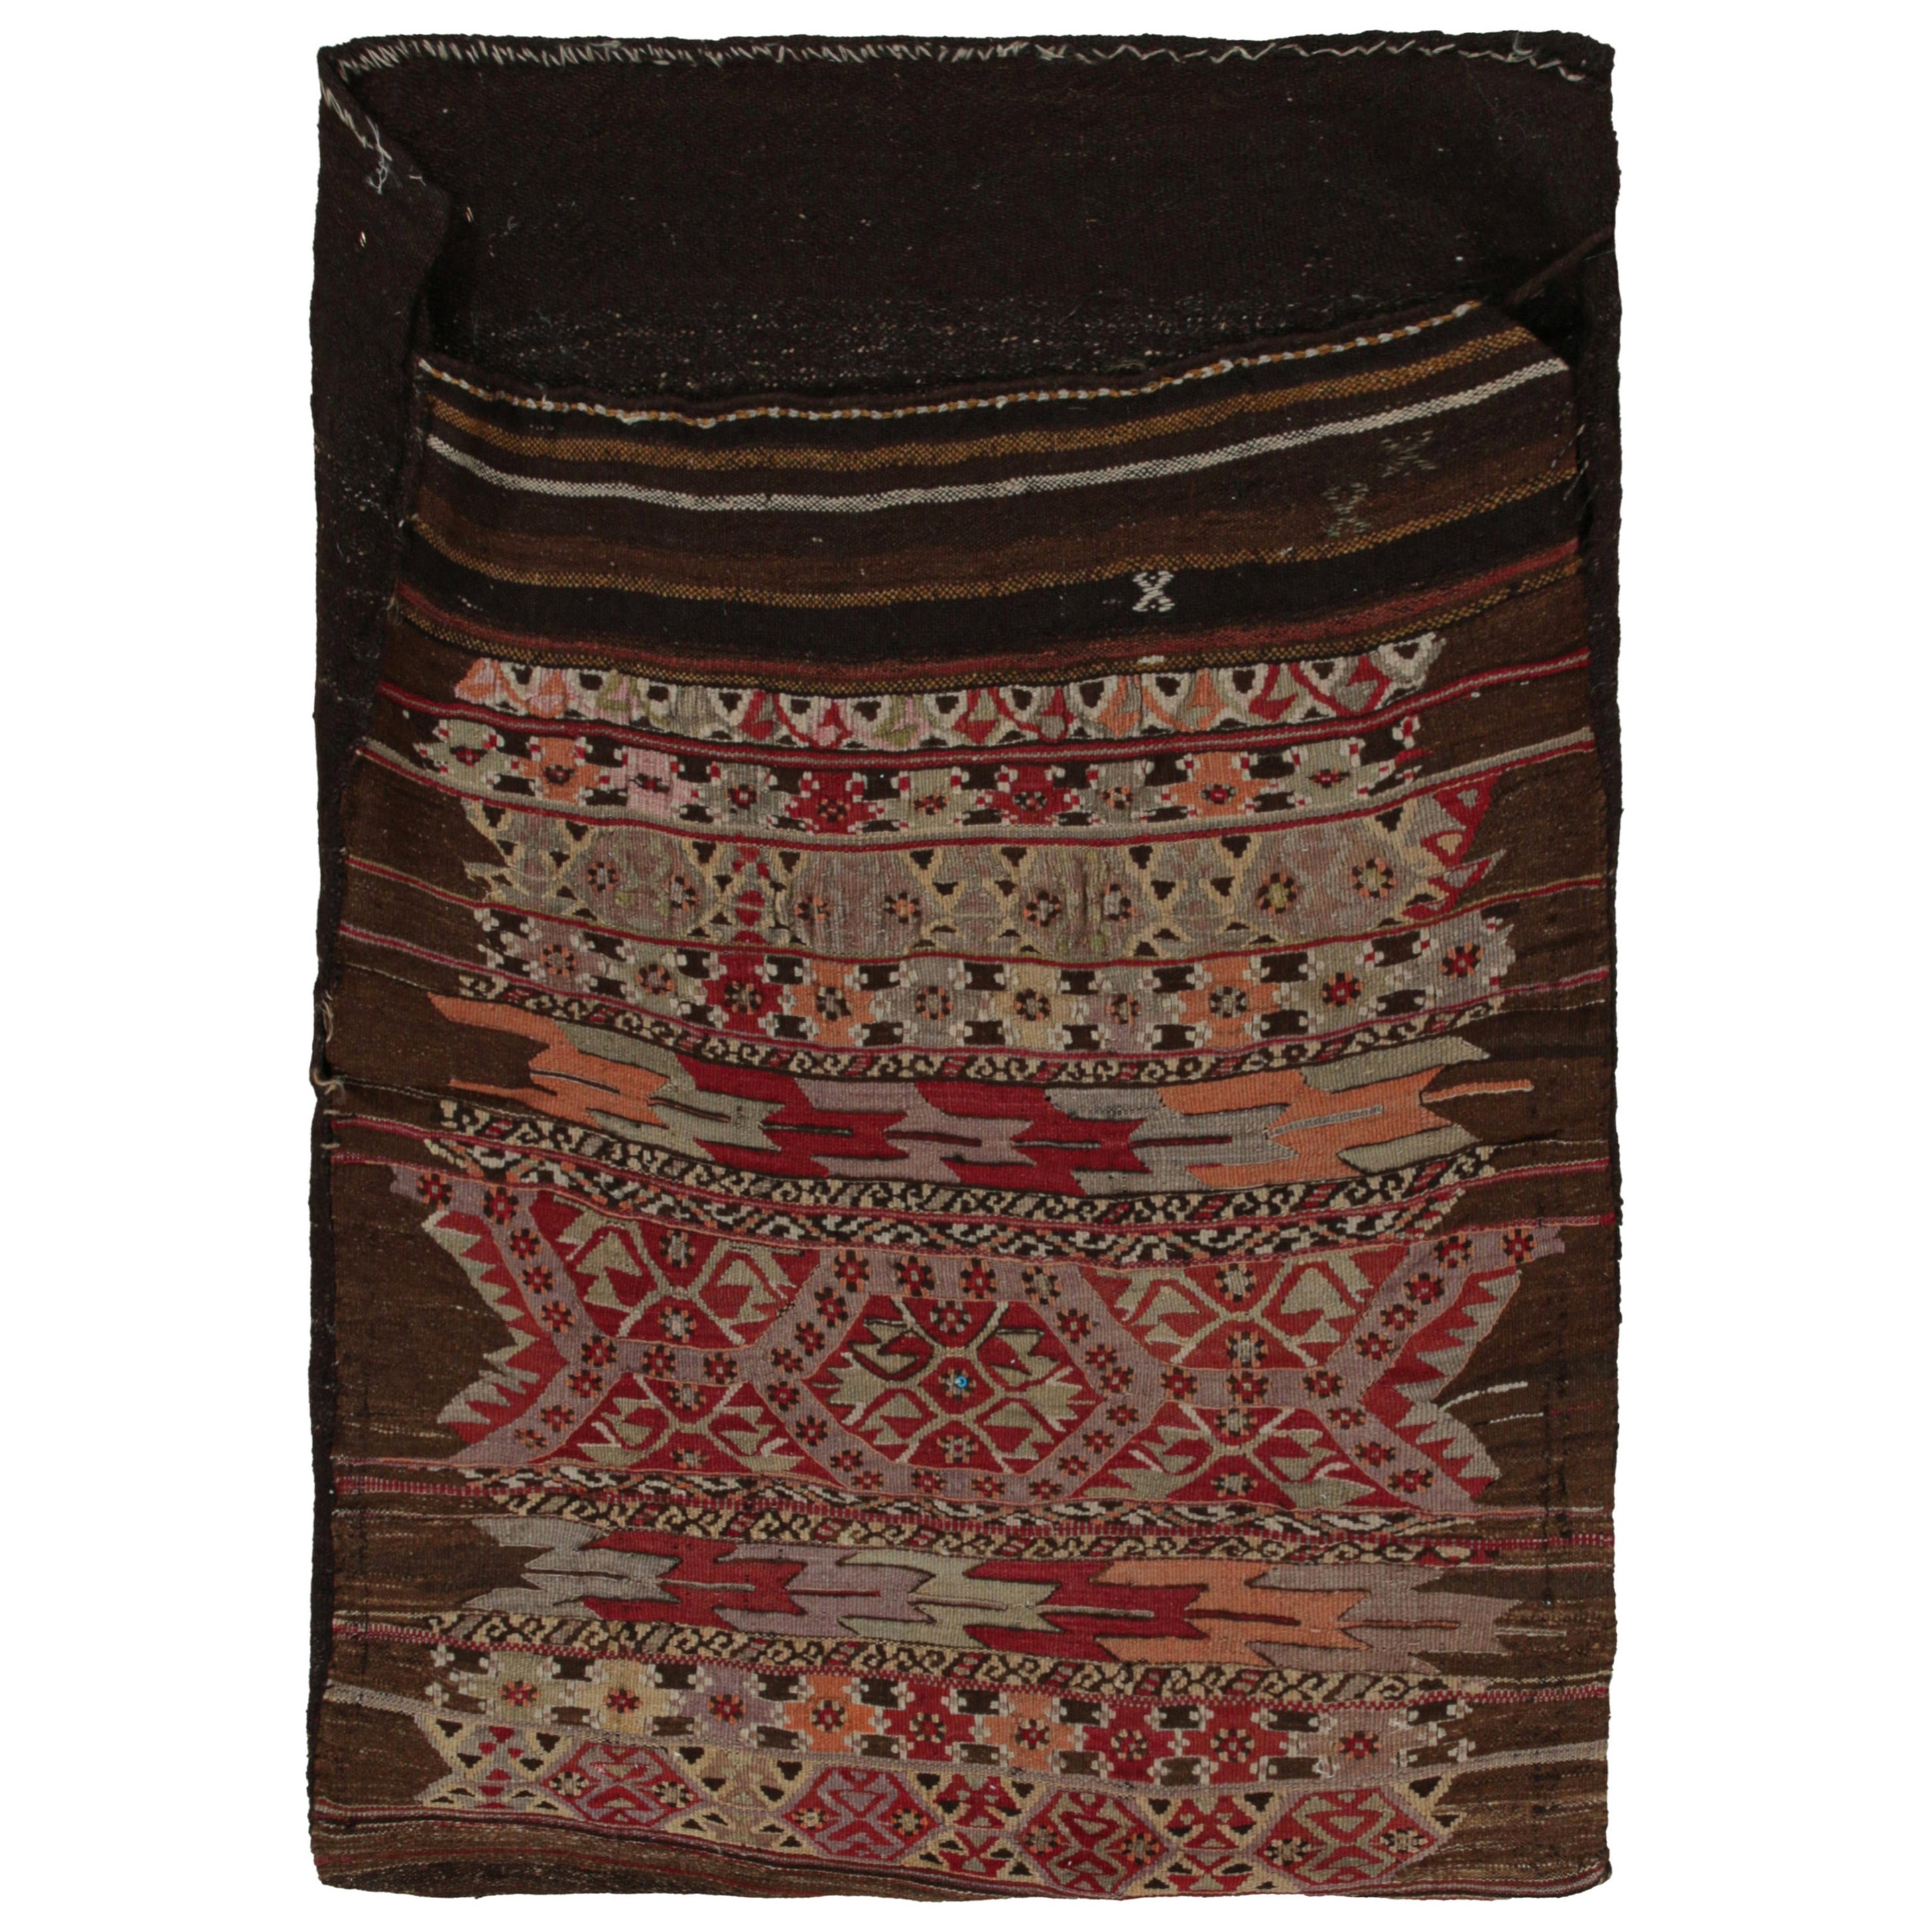 Antique Persian Bag Kilim in Brown with Geometric Patterns, from Rug & Kilim